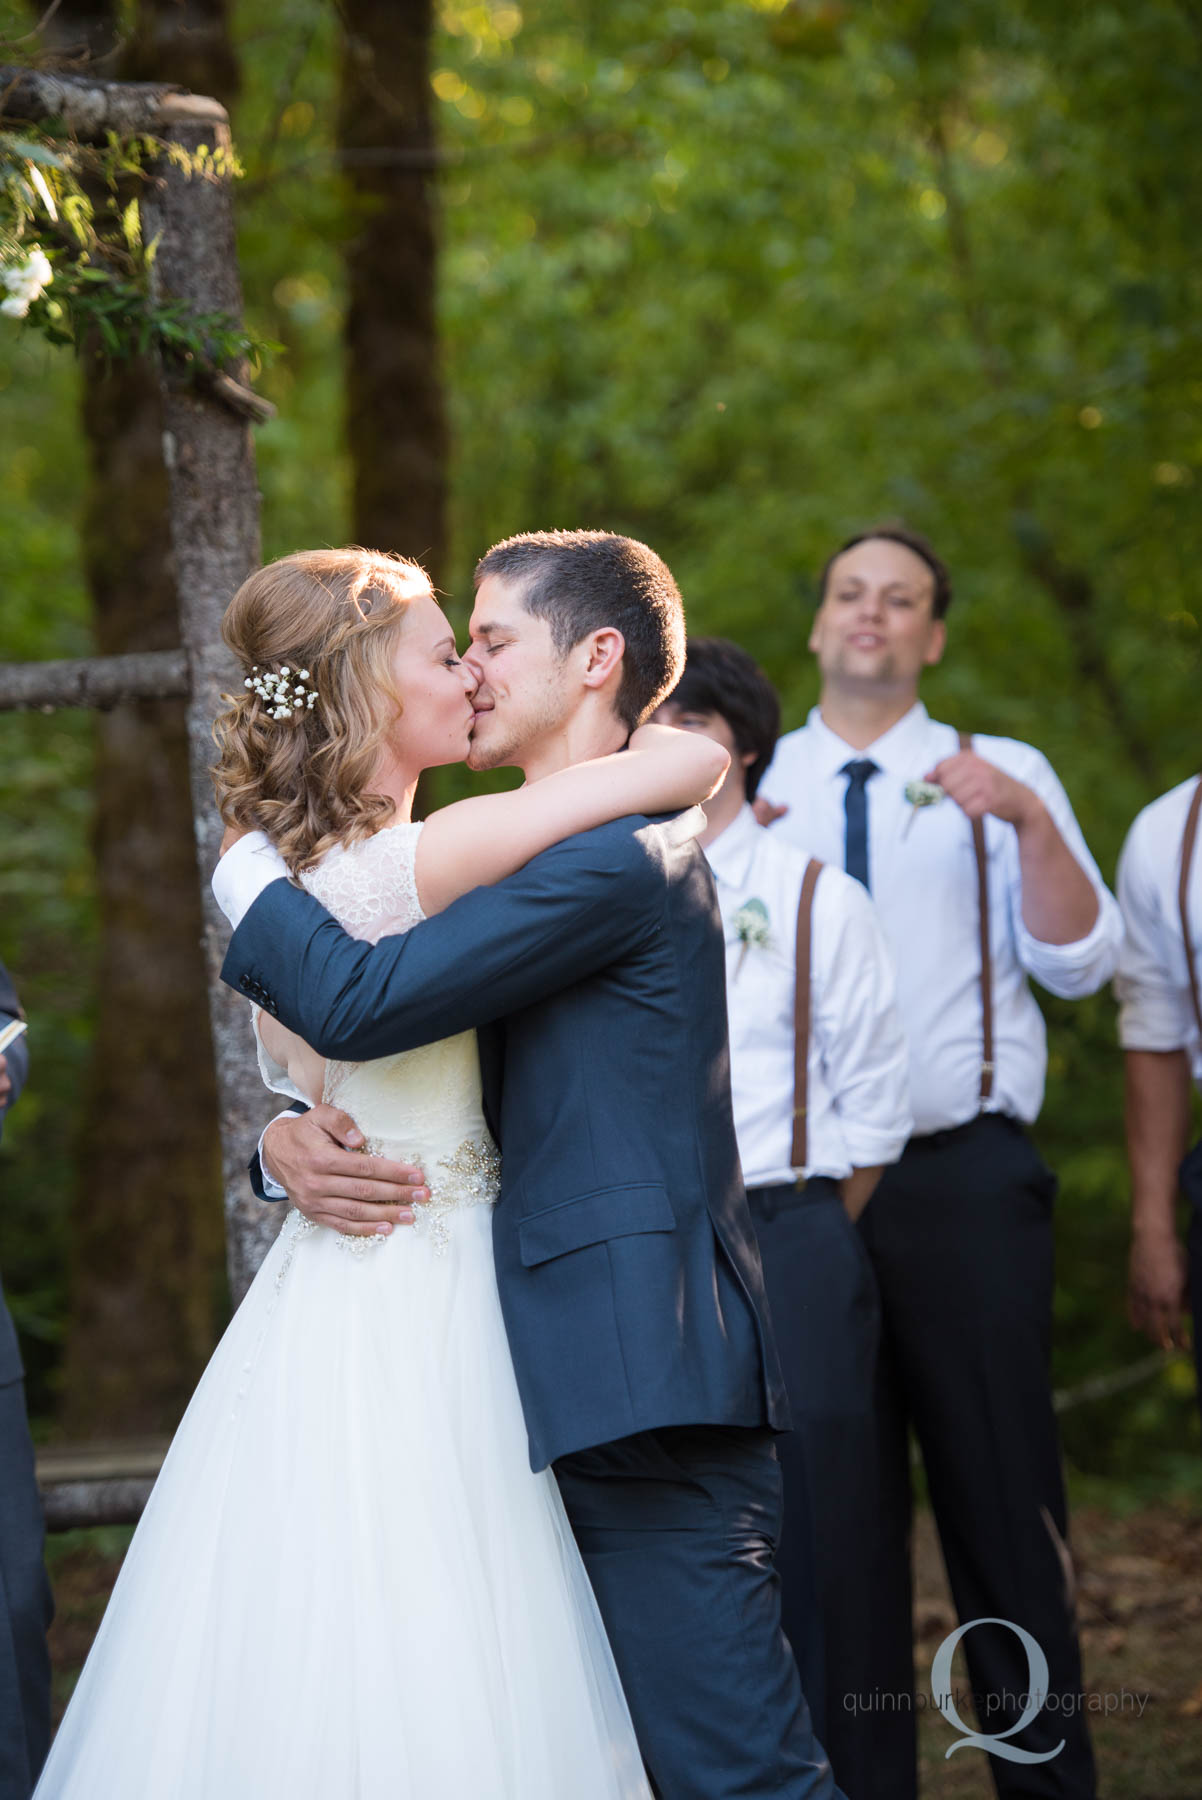 first kiss at wedding ceremony at rons pond